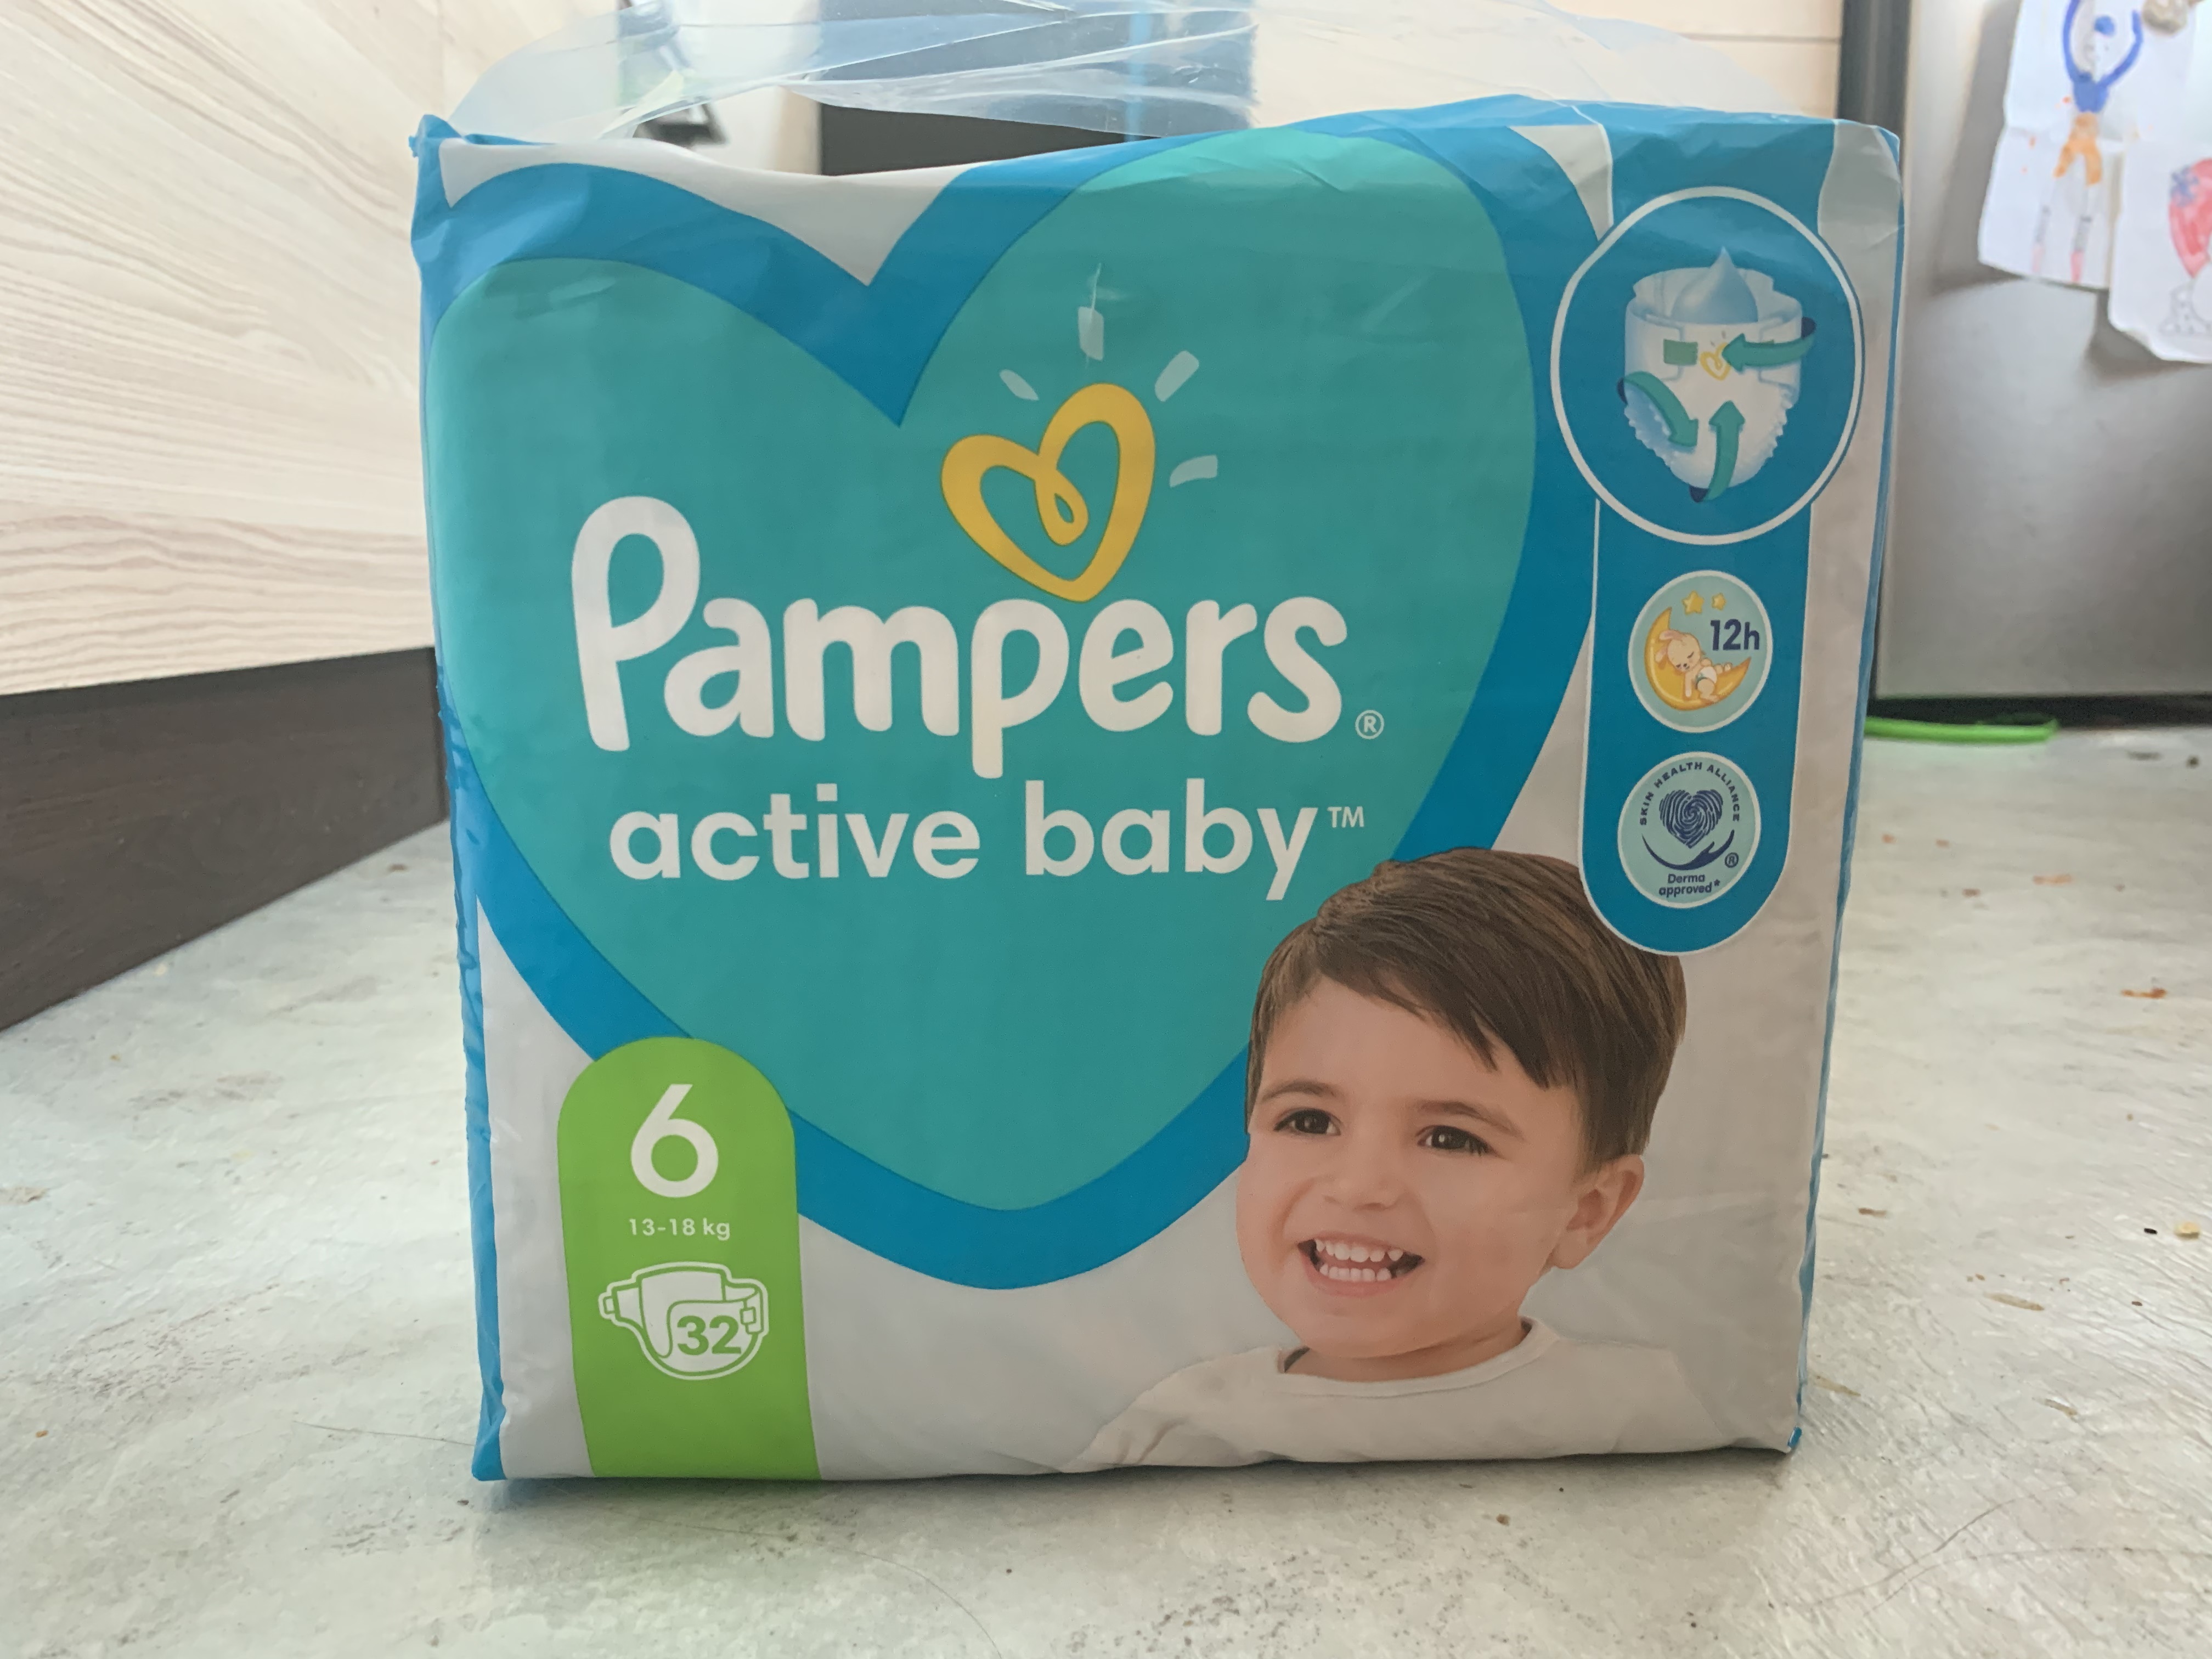 Pampers 6, 32 ks ACTIVE BABY